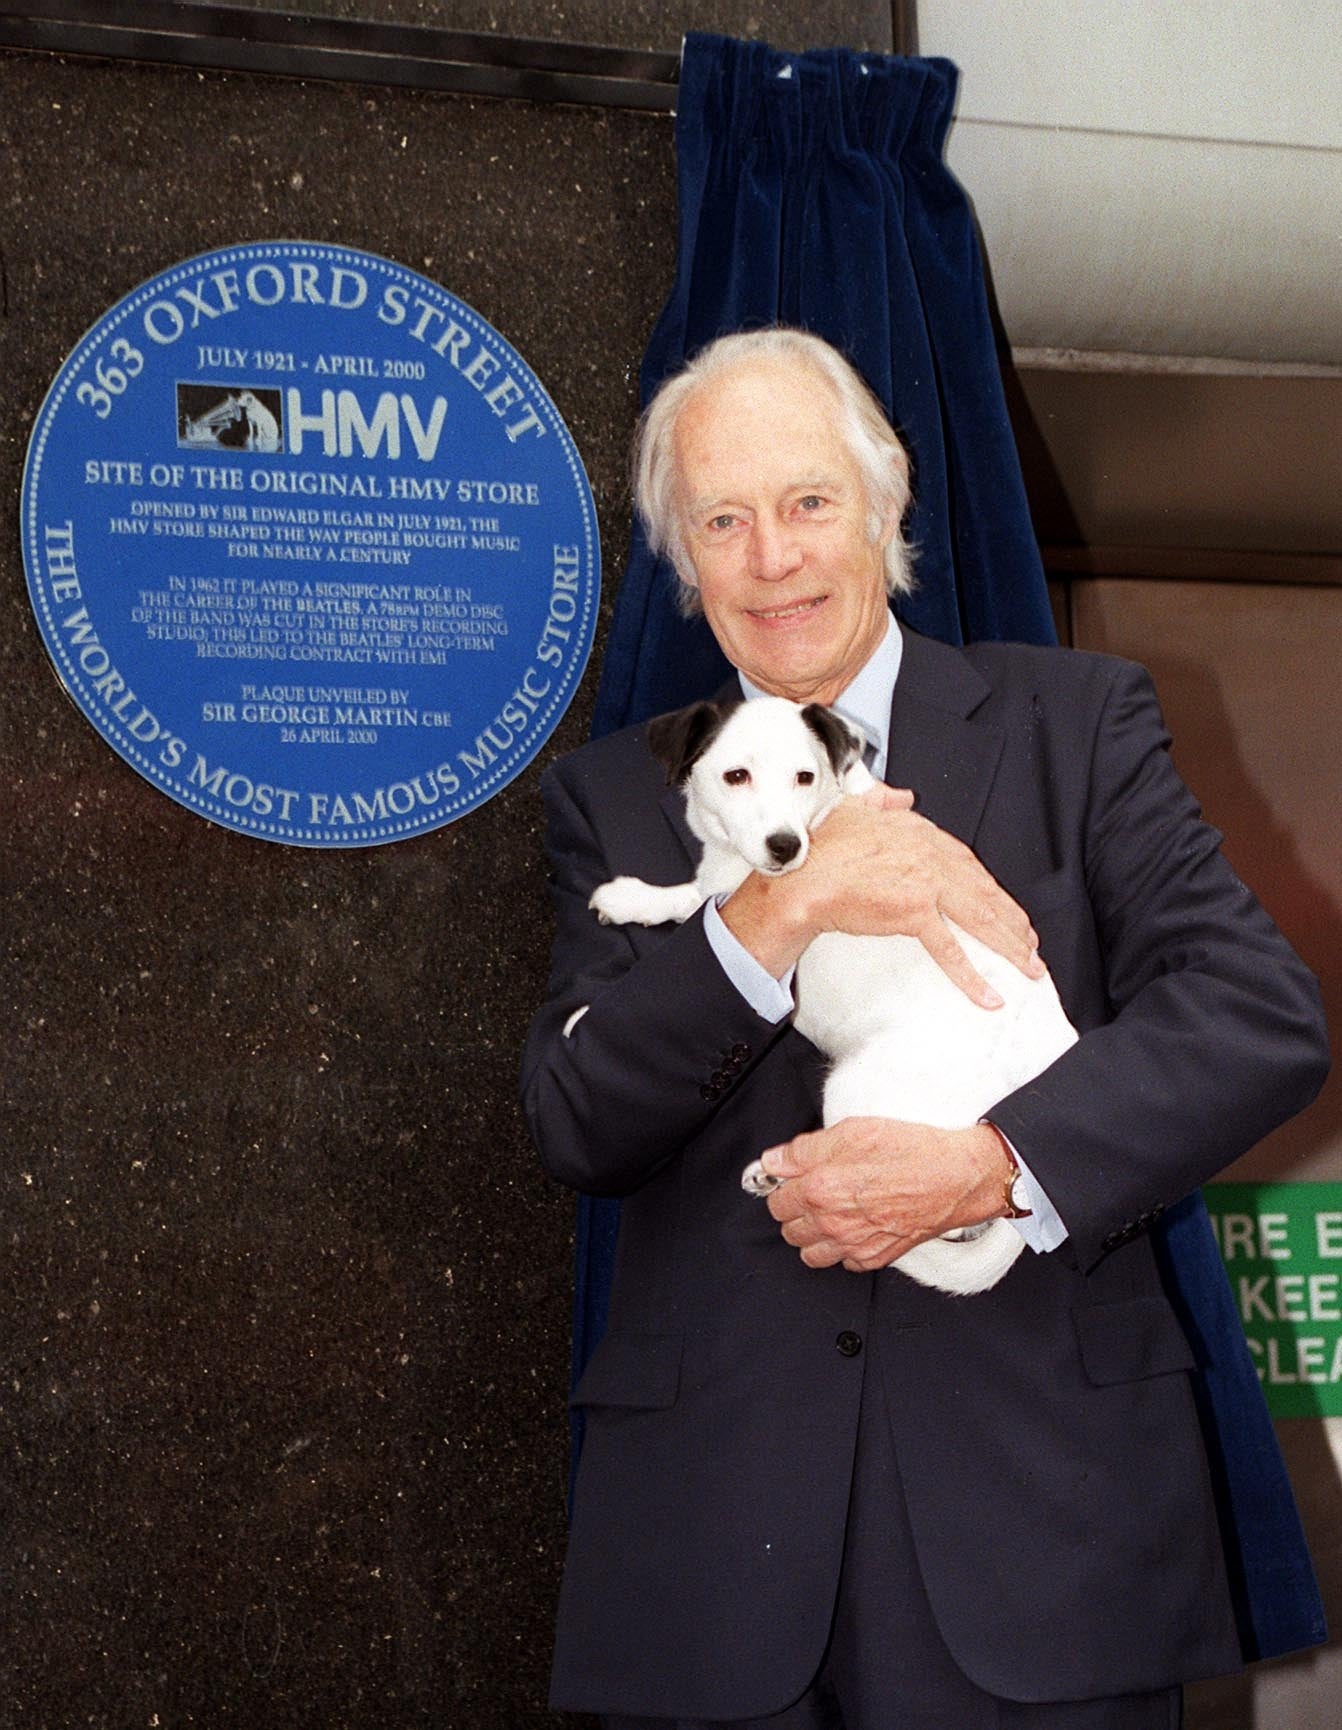 Beatles producer Sir George Martin with Nipper the dog, at the unveiling of a plaque, in London's Oxford Street, to record the role the record store played in bringing the Beatles to fame in 2000